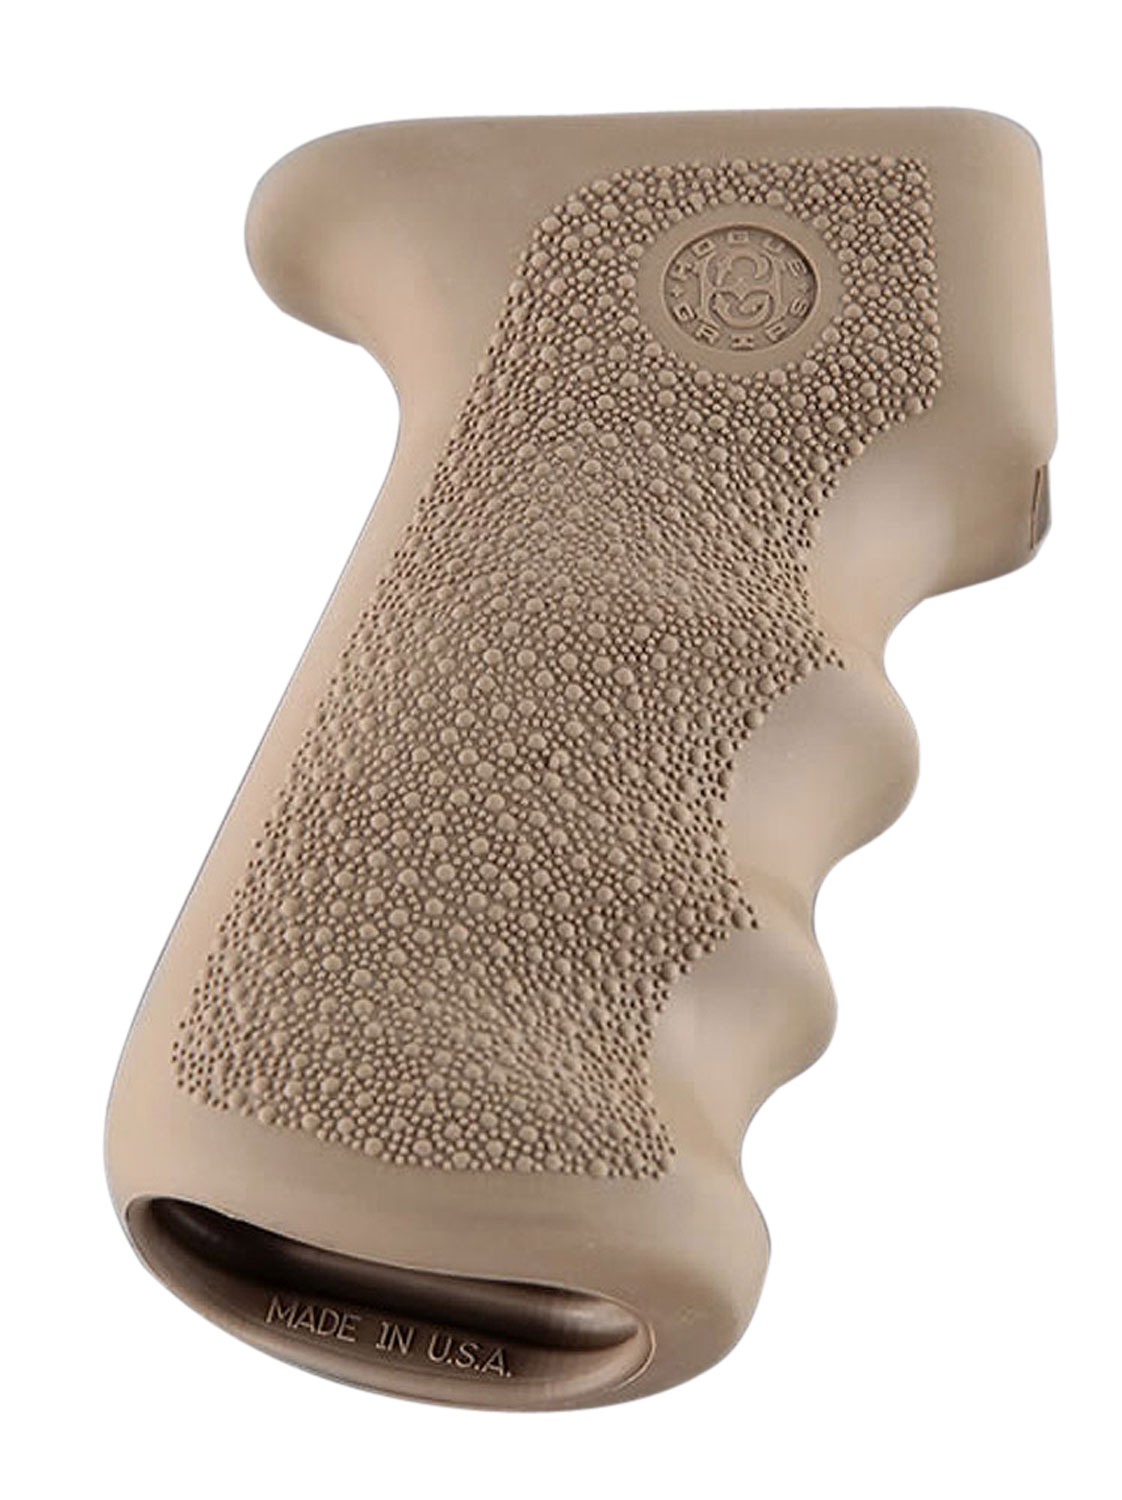 Hogue 74003 Rubber Grip  Flat Dark Earth Rubber Textured Finish with Finger Grooves fits AK-47, AK-74